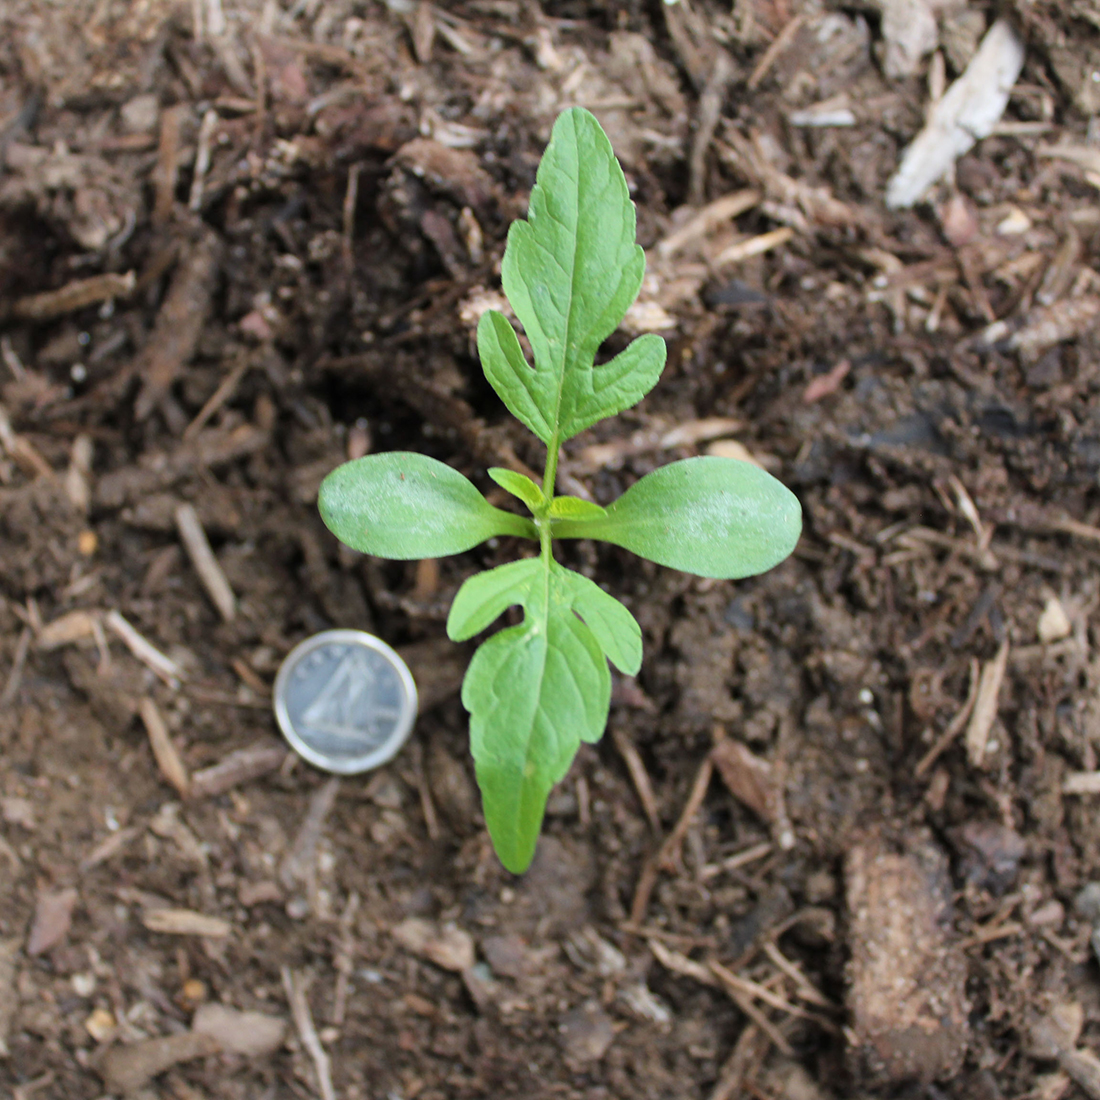 A 2-leaf plant with its oblong cotyledons